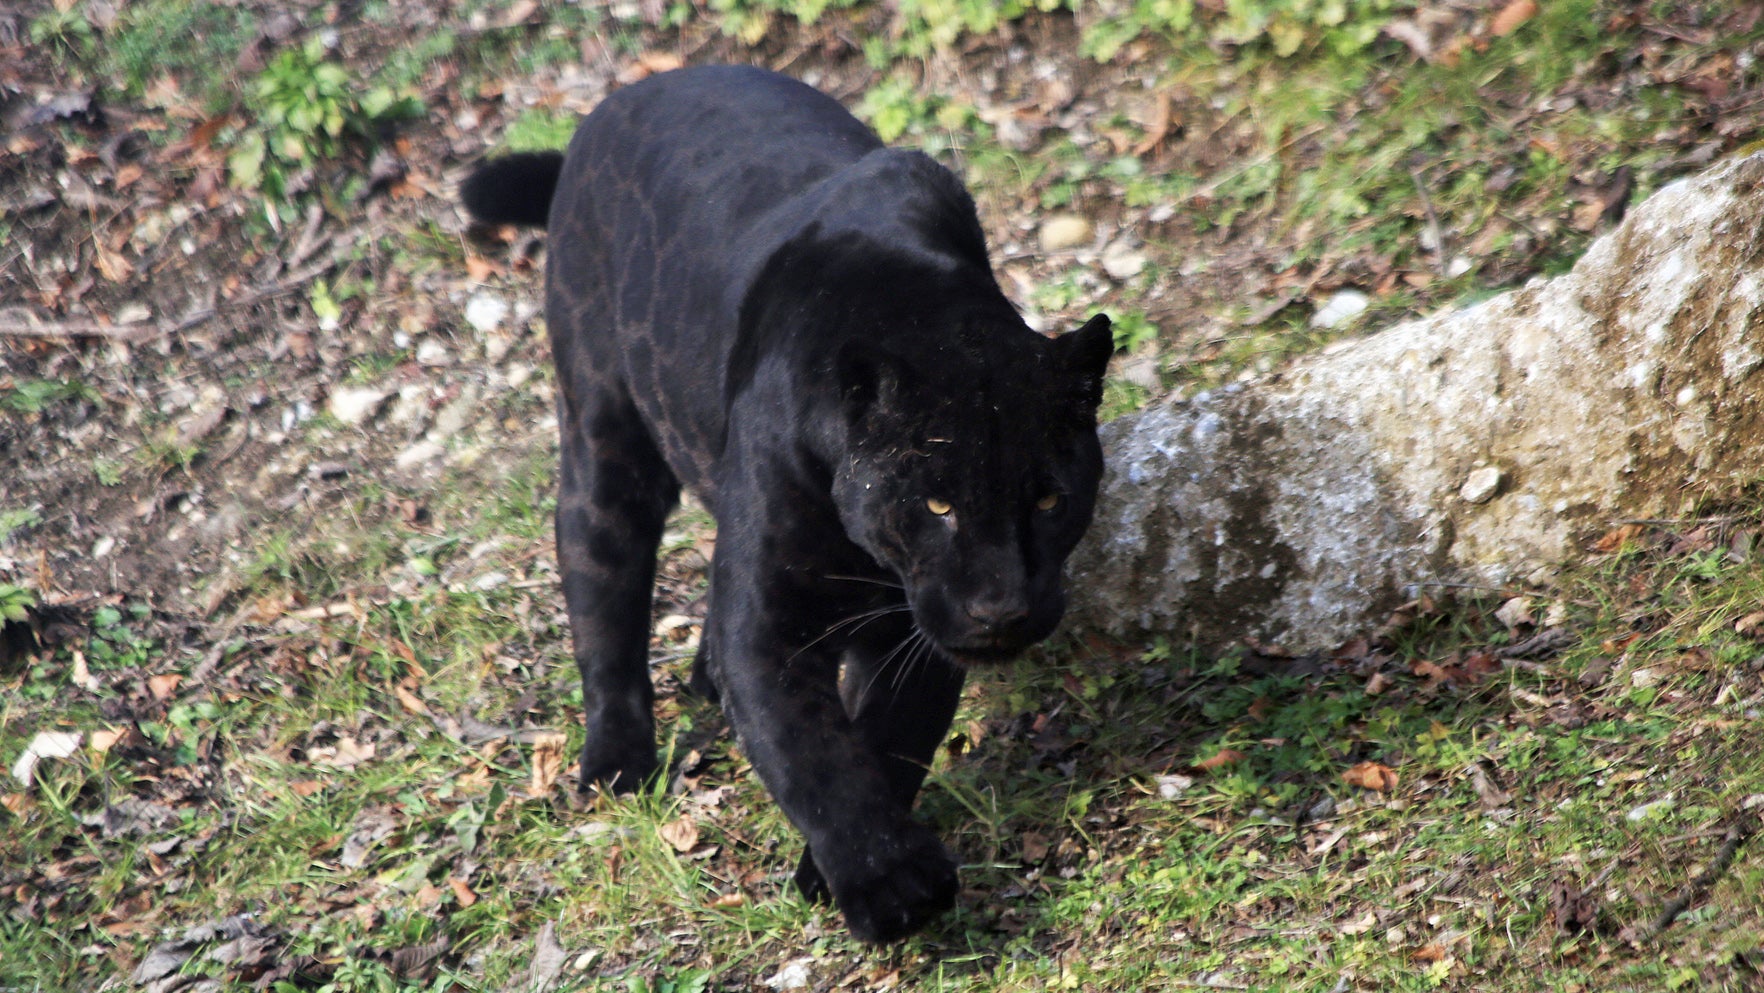 Man reports black panther sighting in Bogue Chitto - Daily Leader